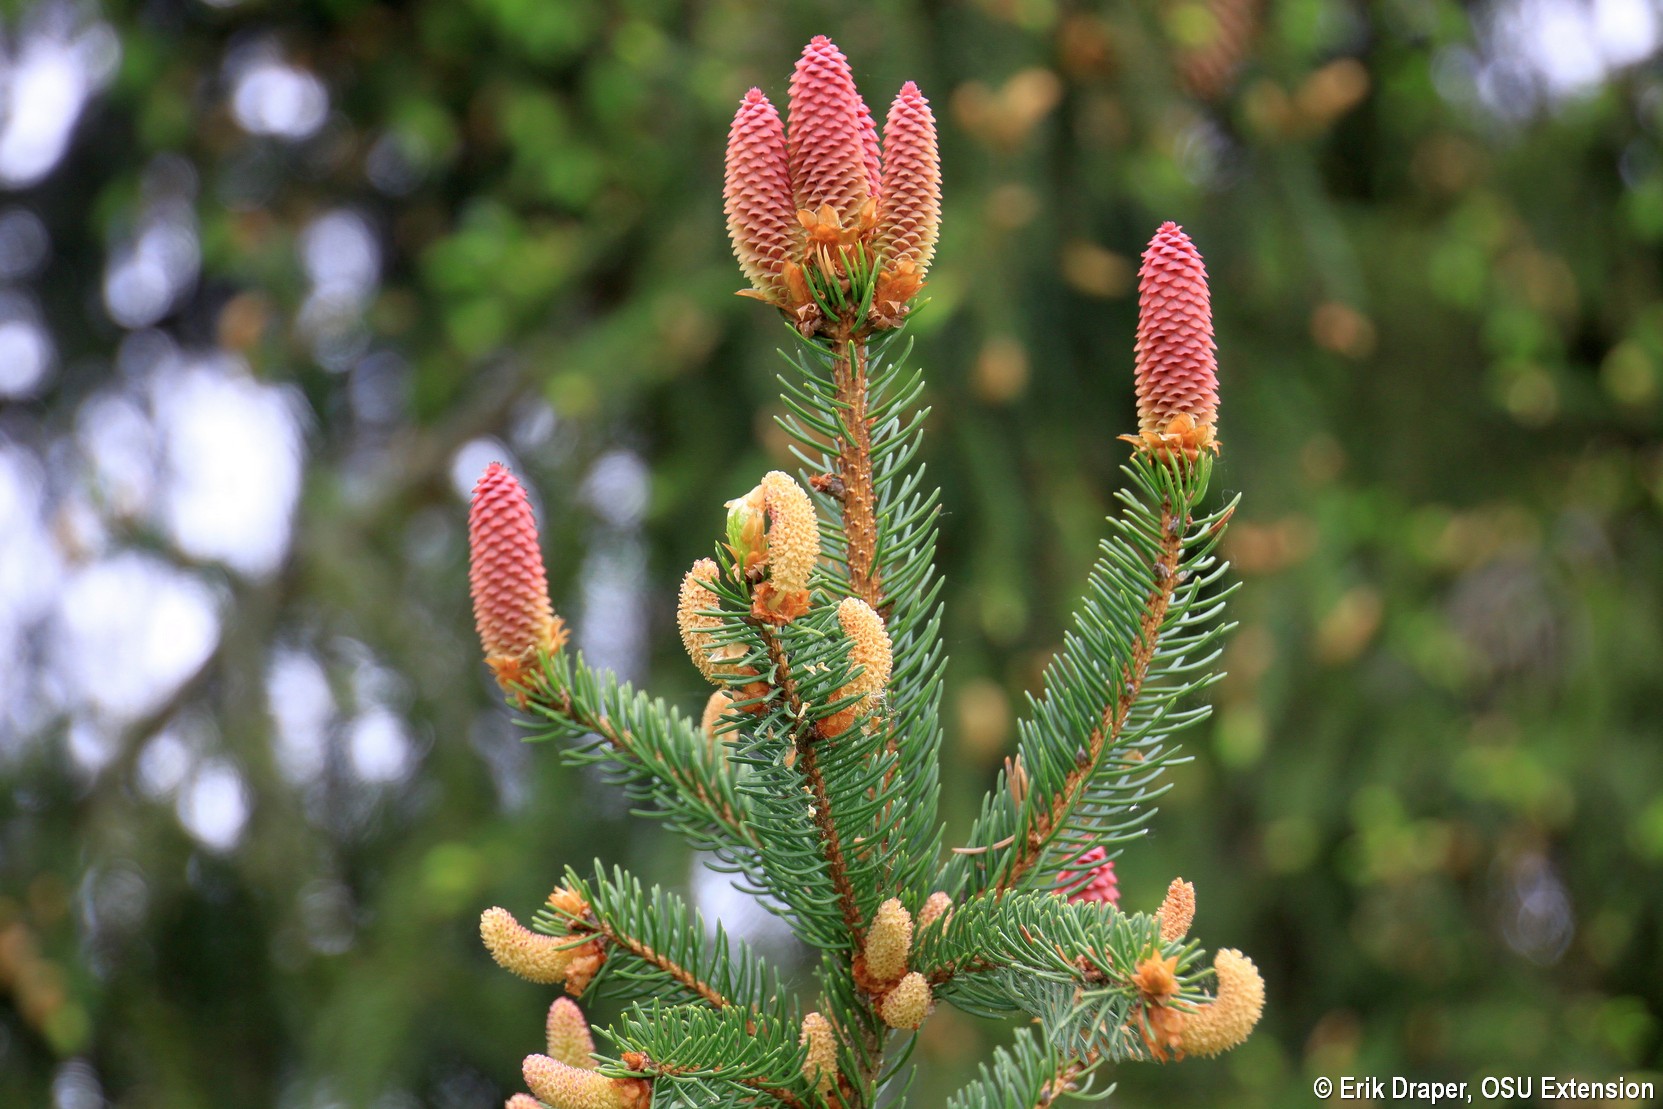 Female Norway spruce cones at the top with male cones lower down